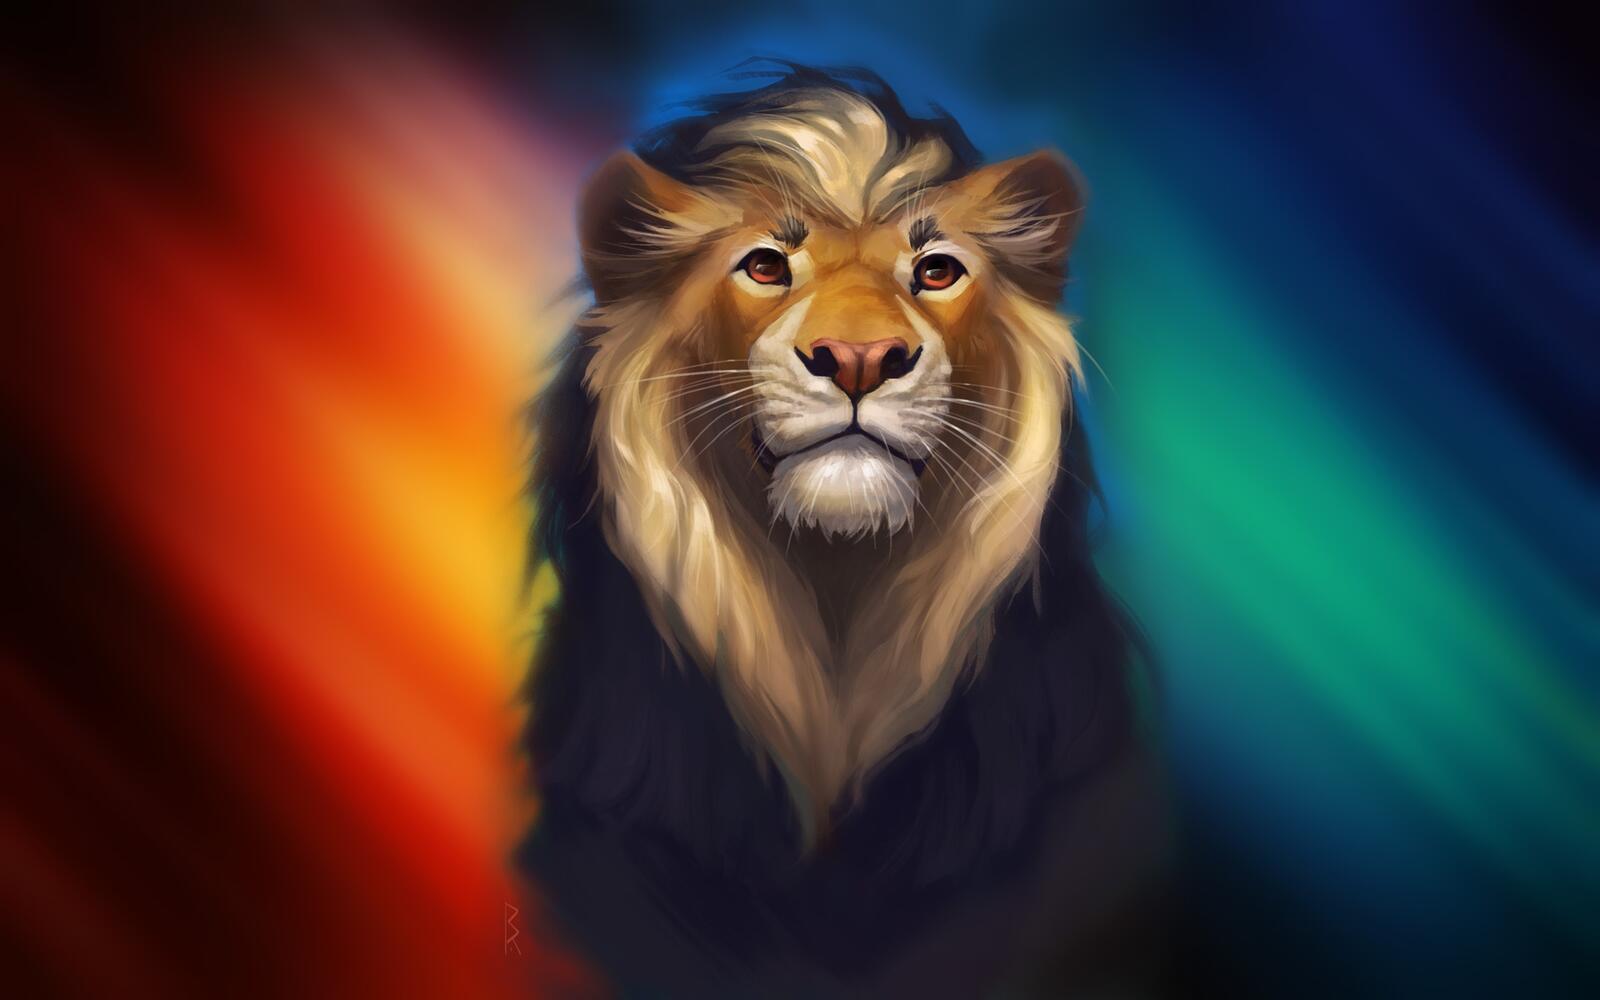 Wallpapers lion colorful rendering on the desktop